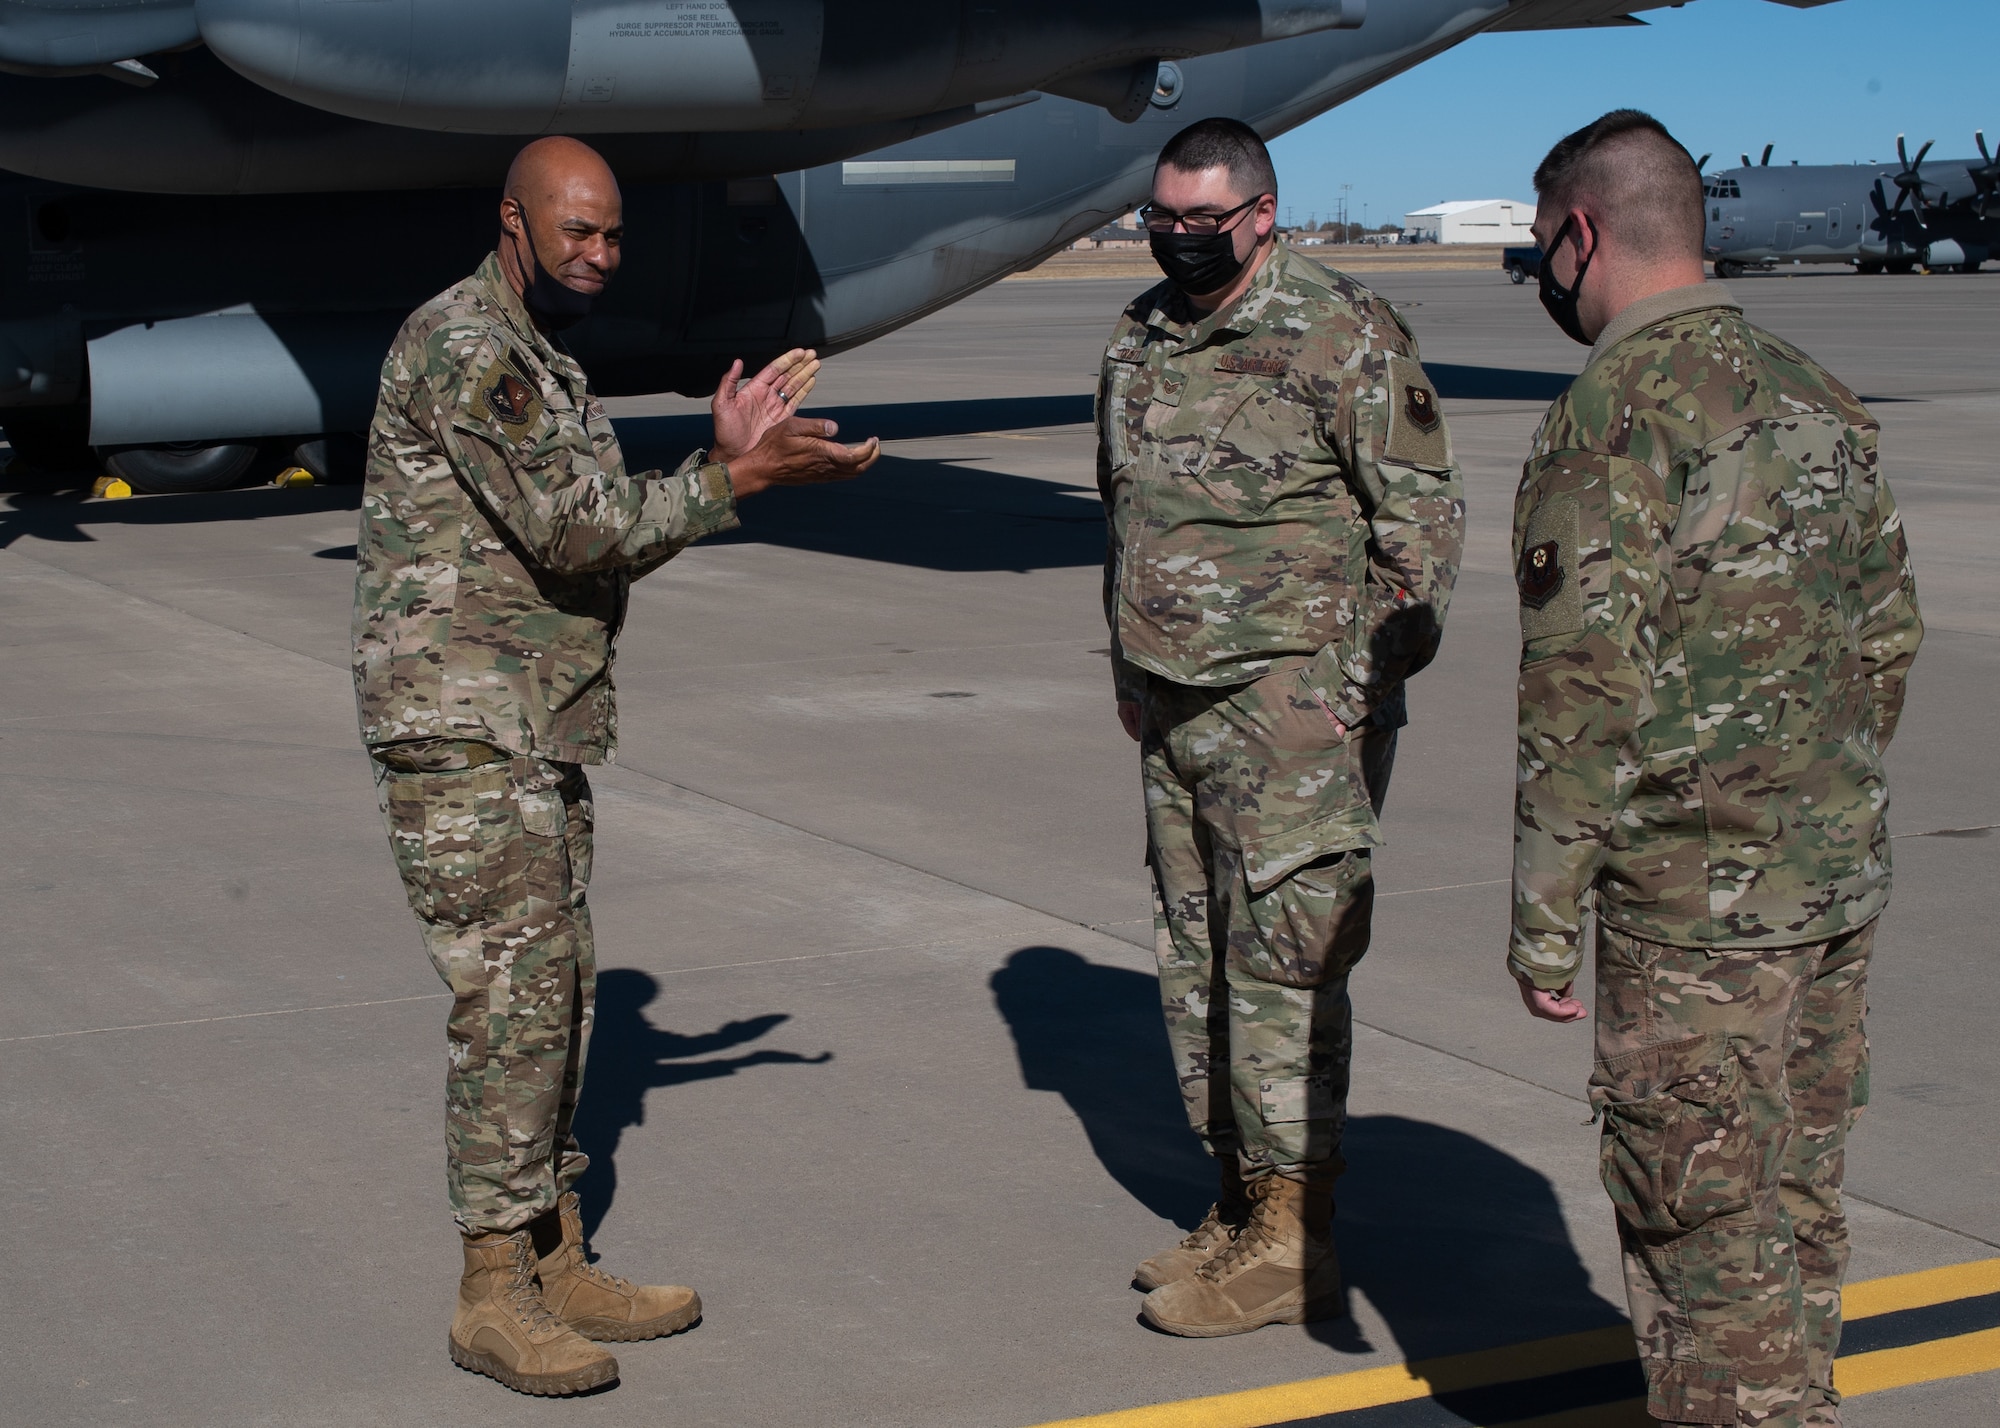 An Air Force Colonel lauds an Airmen in front of a military cargo aircraft.